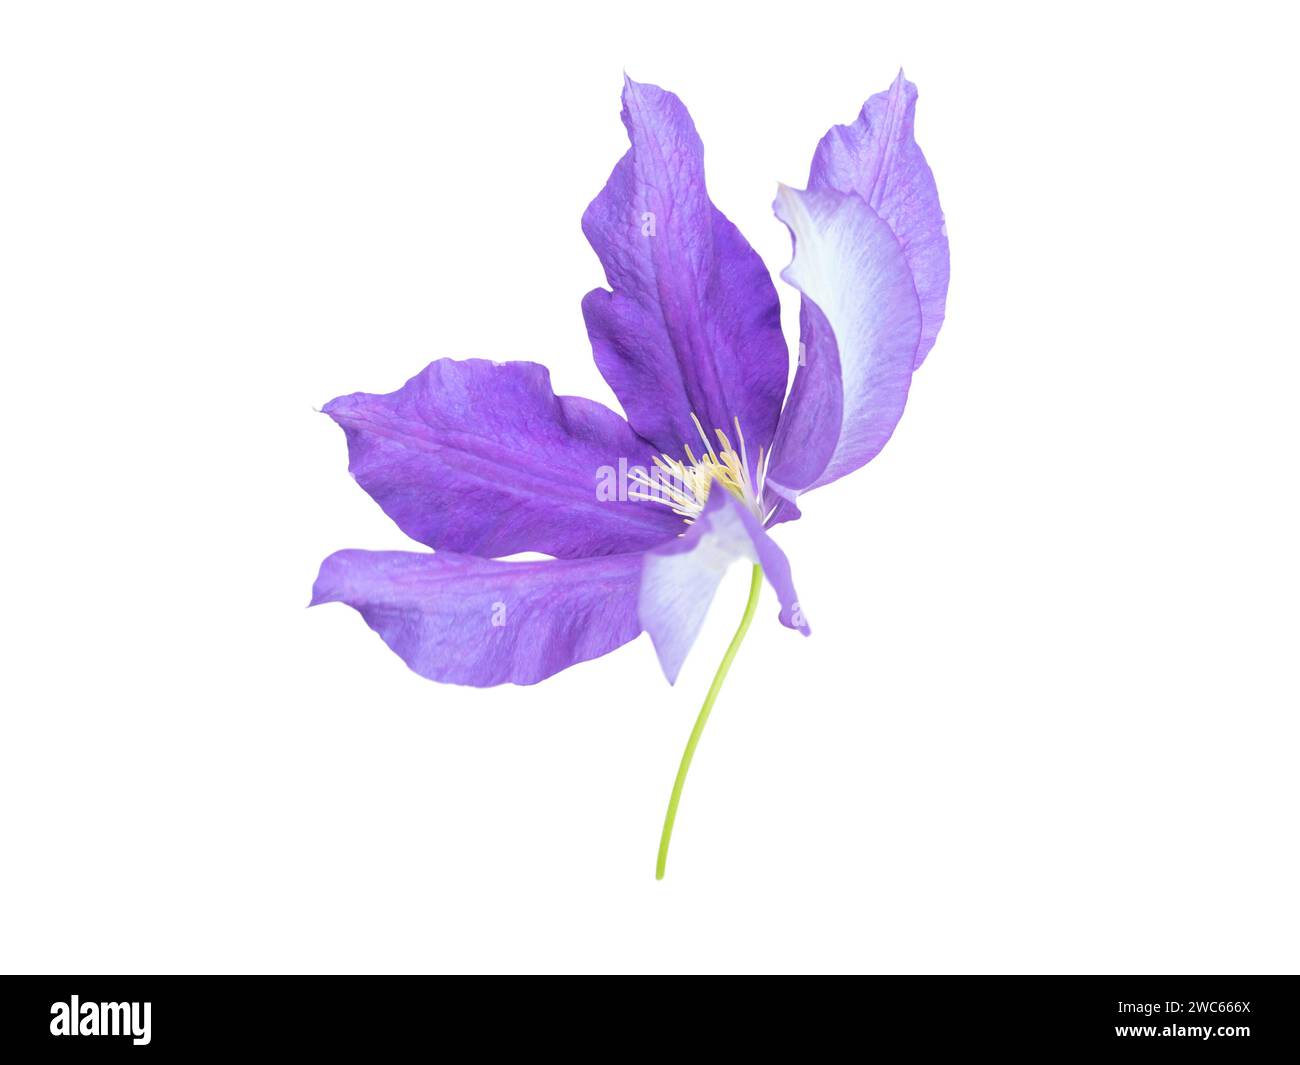 Purple clematis flower closeup isolated on white. Shallow focus. Clematis jackmanii bloom sway in the wind side view. Stock Photo